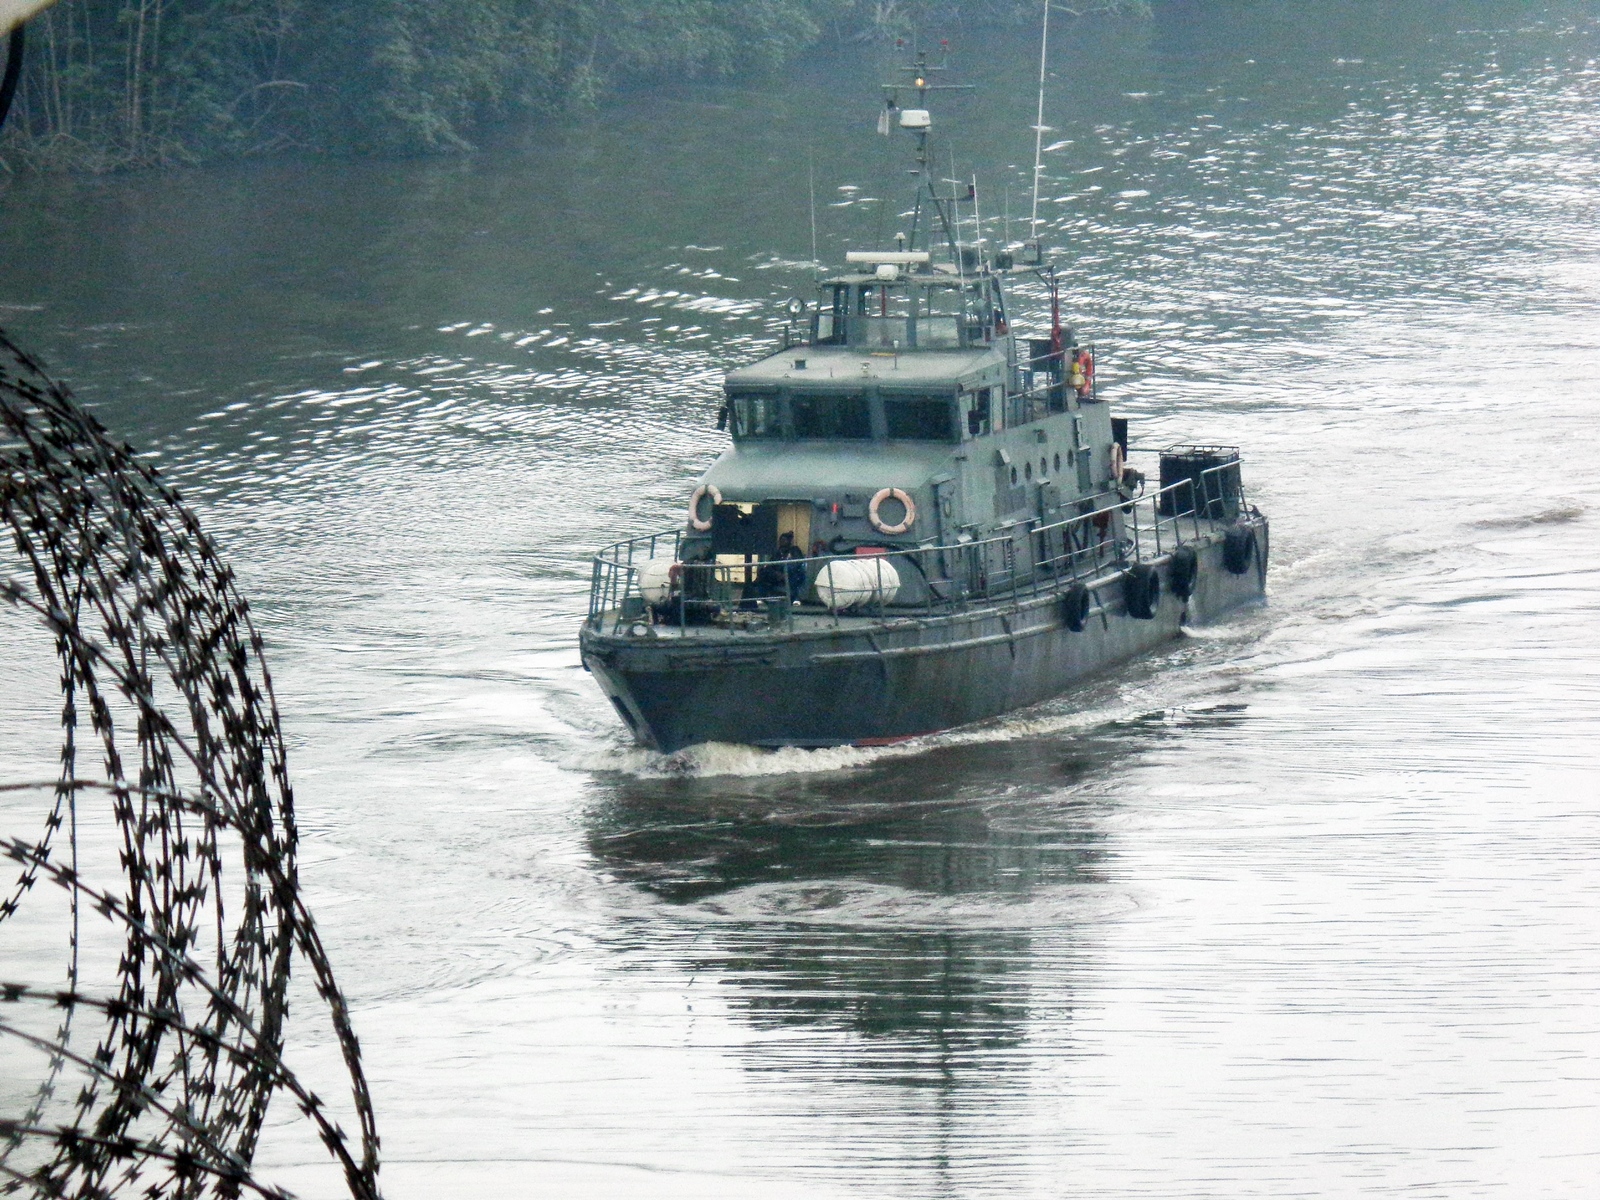 The privately contracted patrol boat NNS WARRIOR provides riverine escort to a merchant vessel in 2016. Photo: source withheld.